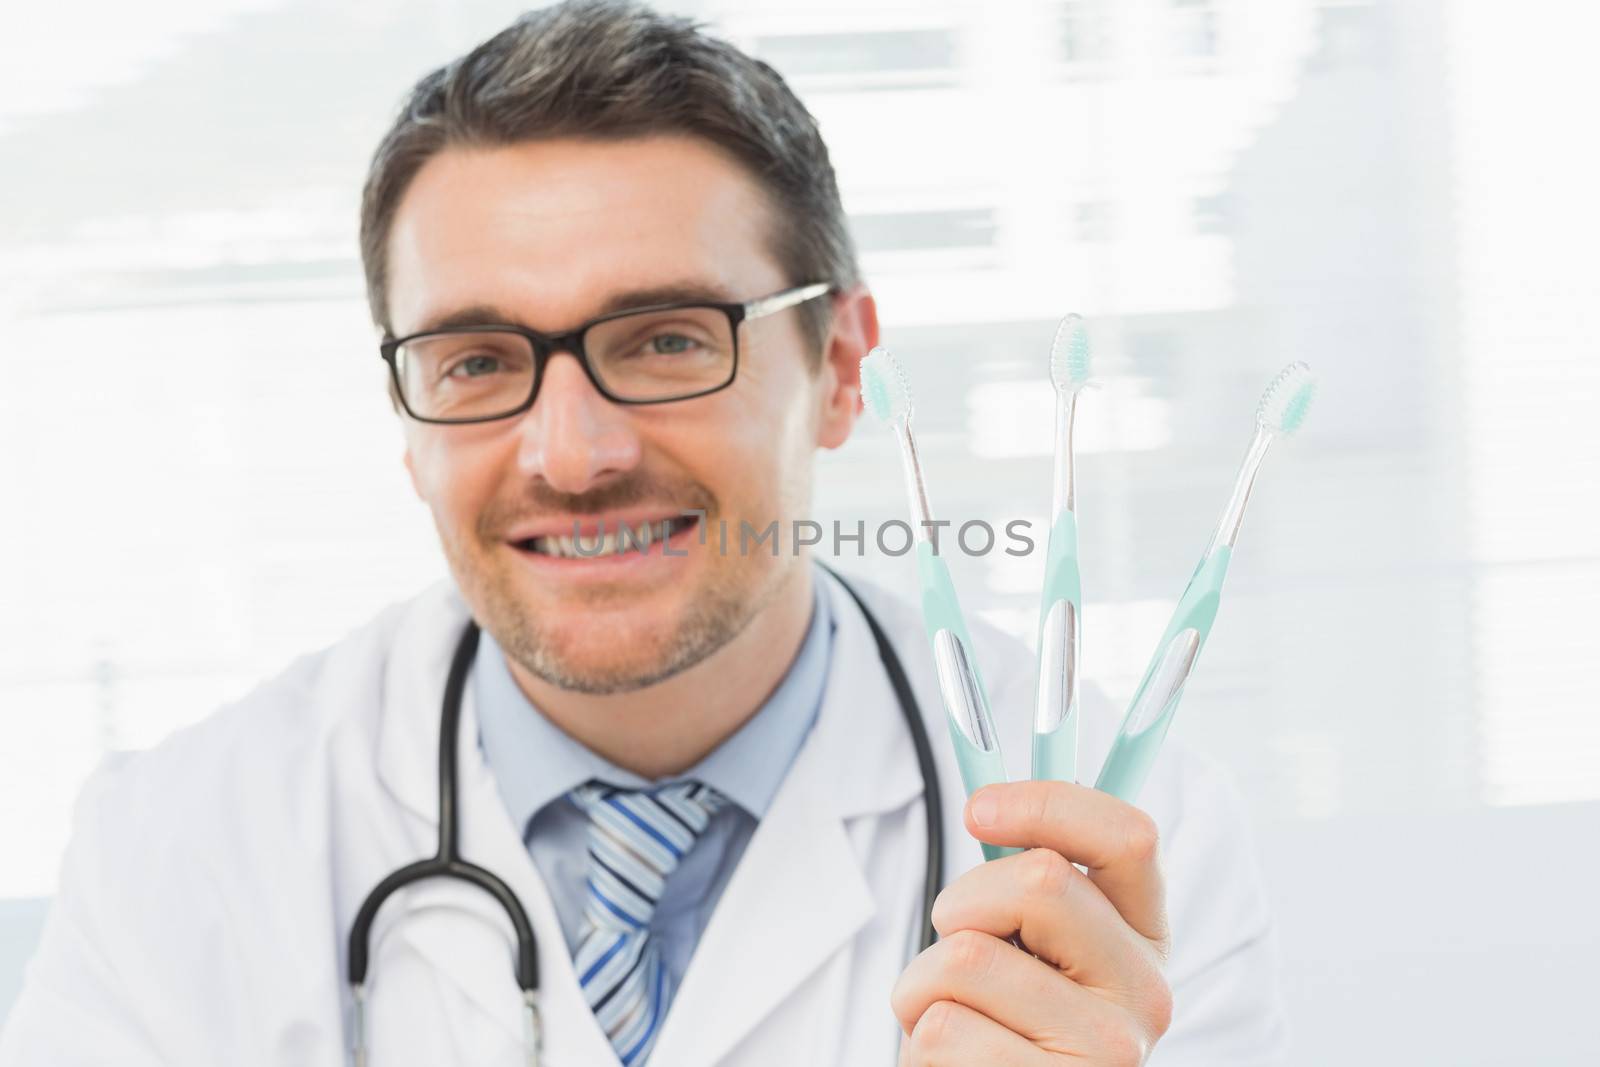 Closeup portrait of a smiling doctor holding toothbrushes in his office